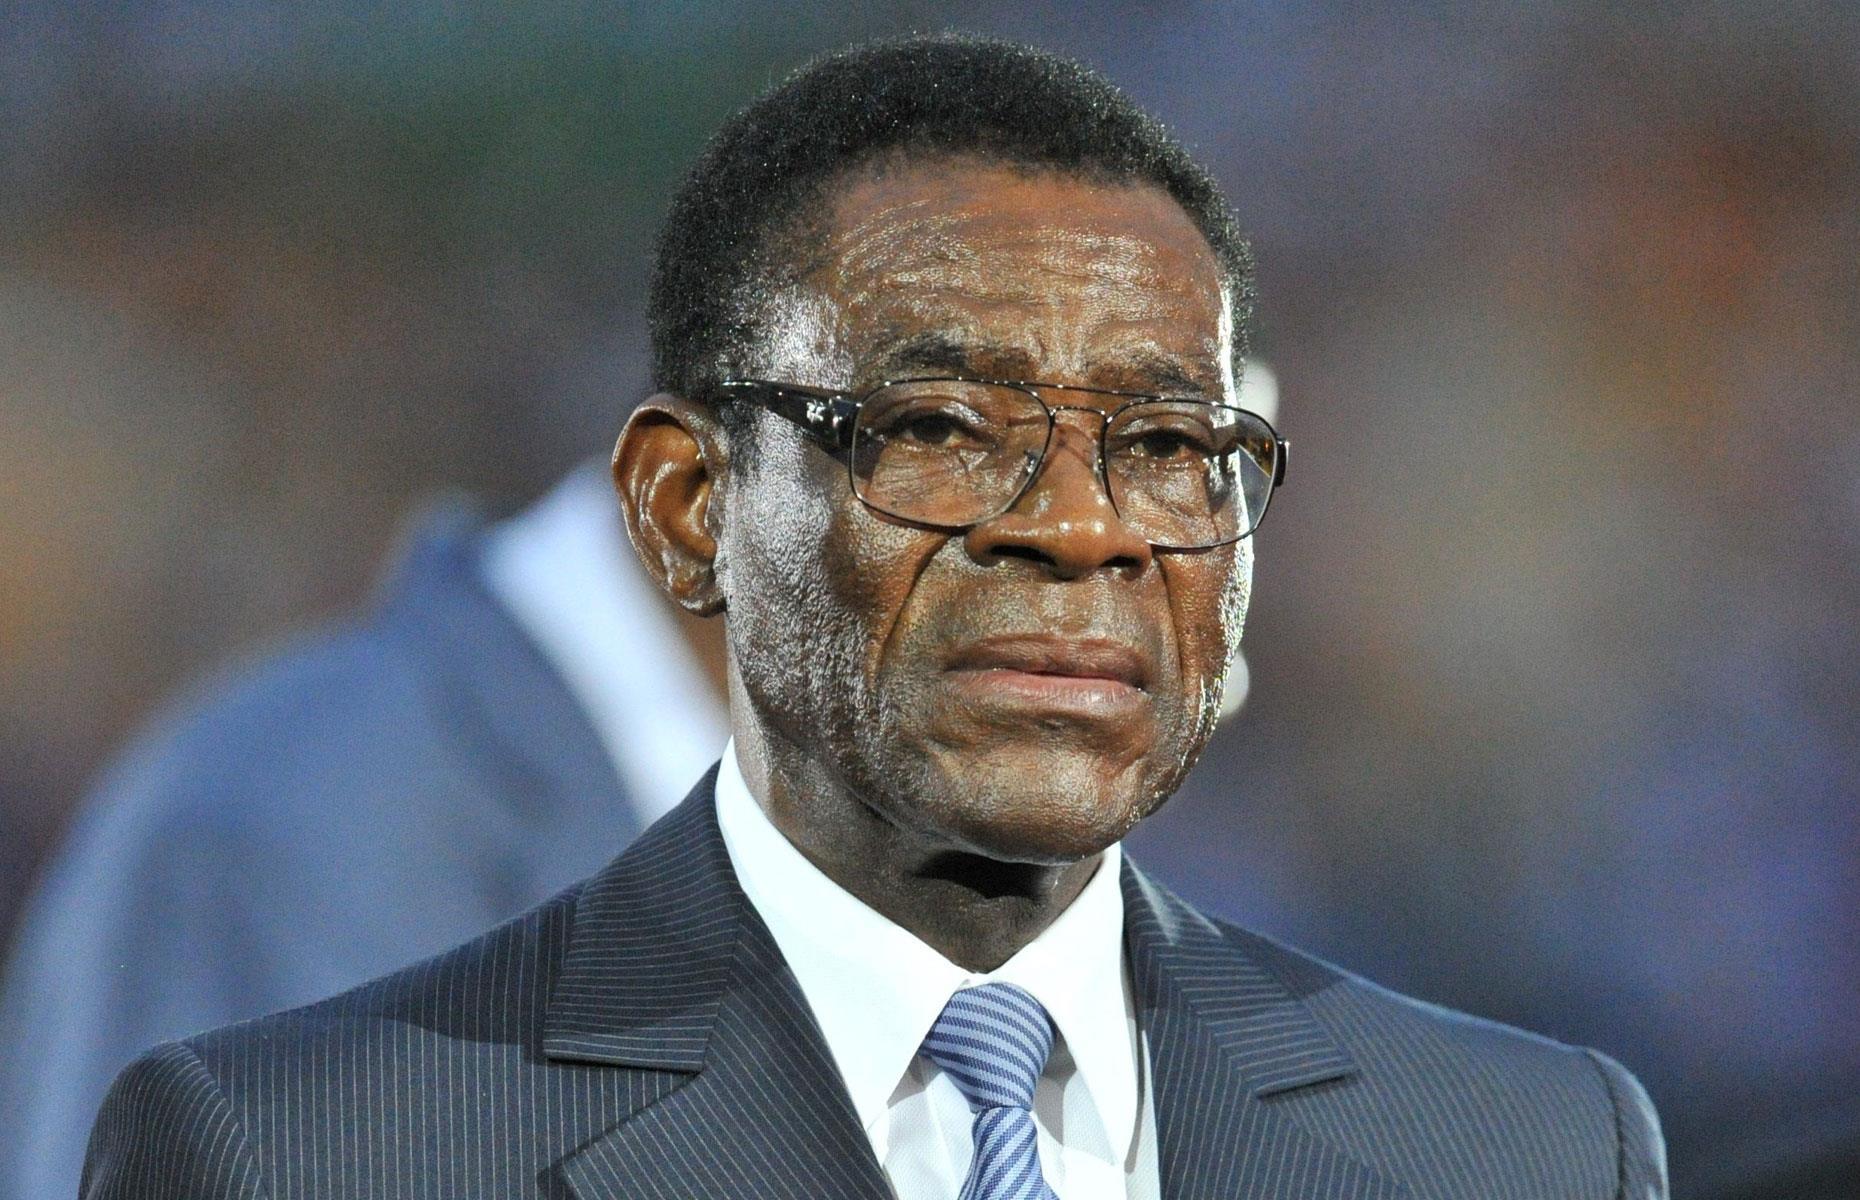 <p>The president of oil-rich Equatorial Guinea since 1979, Teodoro Obiang Nguema Mbasogo has hoarded millions while many of his people live on less than a dollar a day. The corrupt leader owns everything from a Malibu estate to Bugatti Veyrons, Bentleys and a Lamborghini, and has a suitably lavish champagne lifestyle. His net worth was estimated by <em>Forbes</em> in 2006 at $600 million, which is the equivalent of $764 million in today's money.</p>